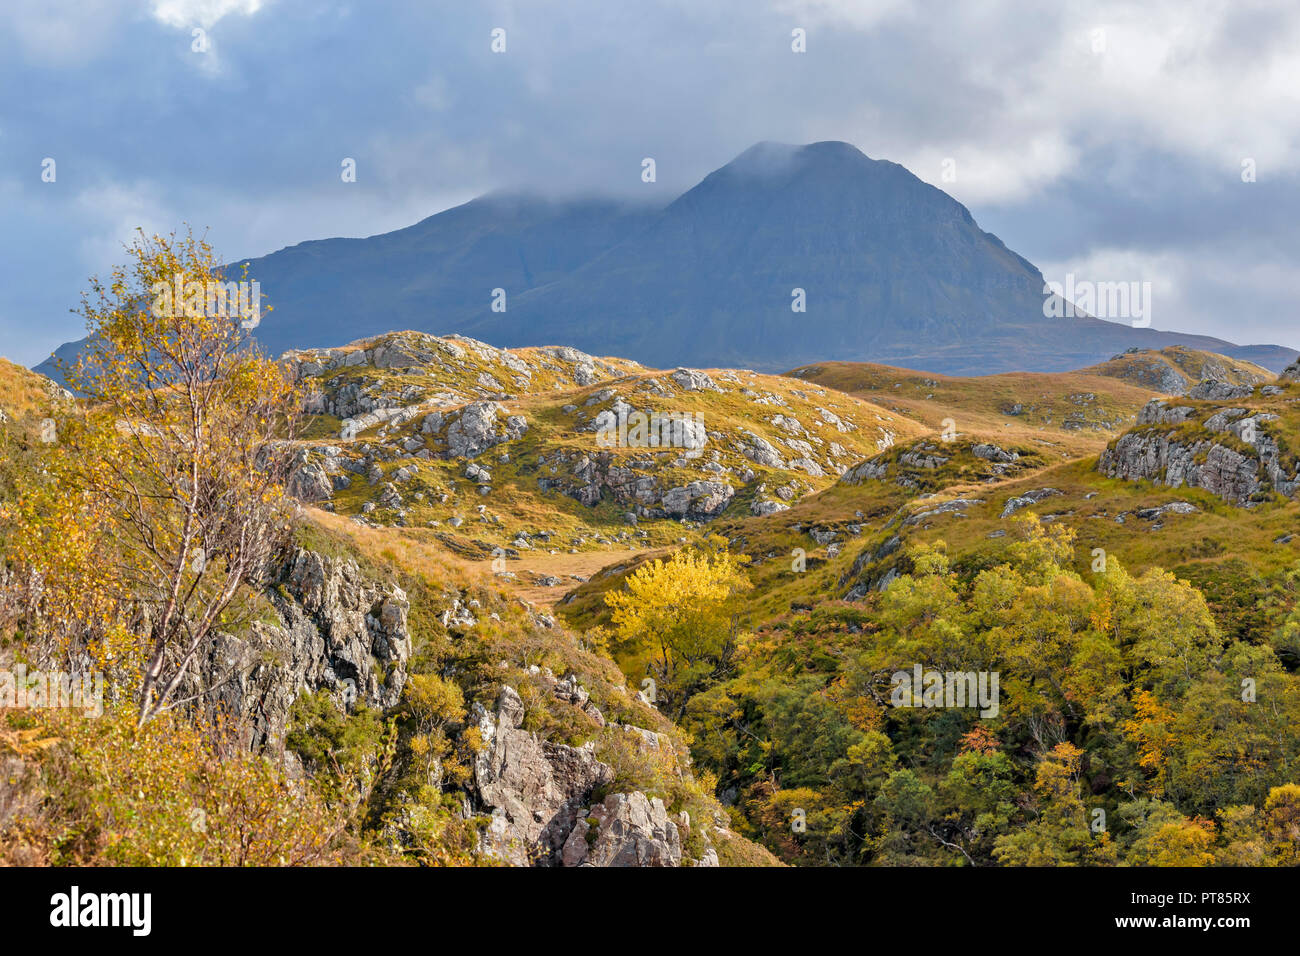 SUILVEN AND RIVER KIRKAIG SUTHERLAND SCOTLAND THE WATERFALL OR FALLS OF KIRKAIG IN AUTUMN SCENIC VIEW FROM ABOVE THE FALLS Stock Photo